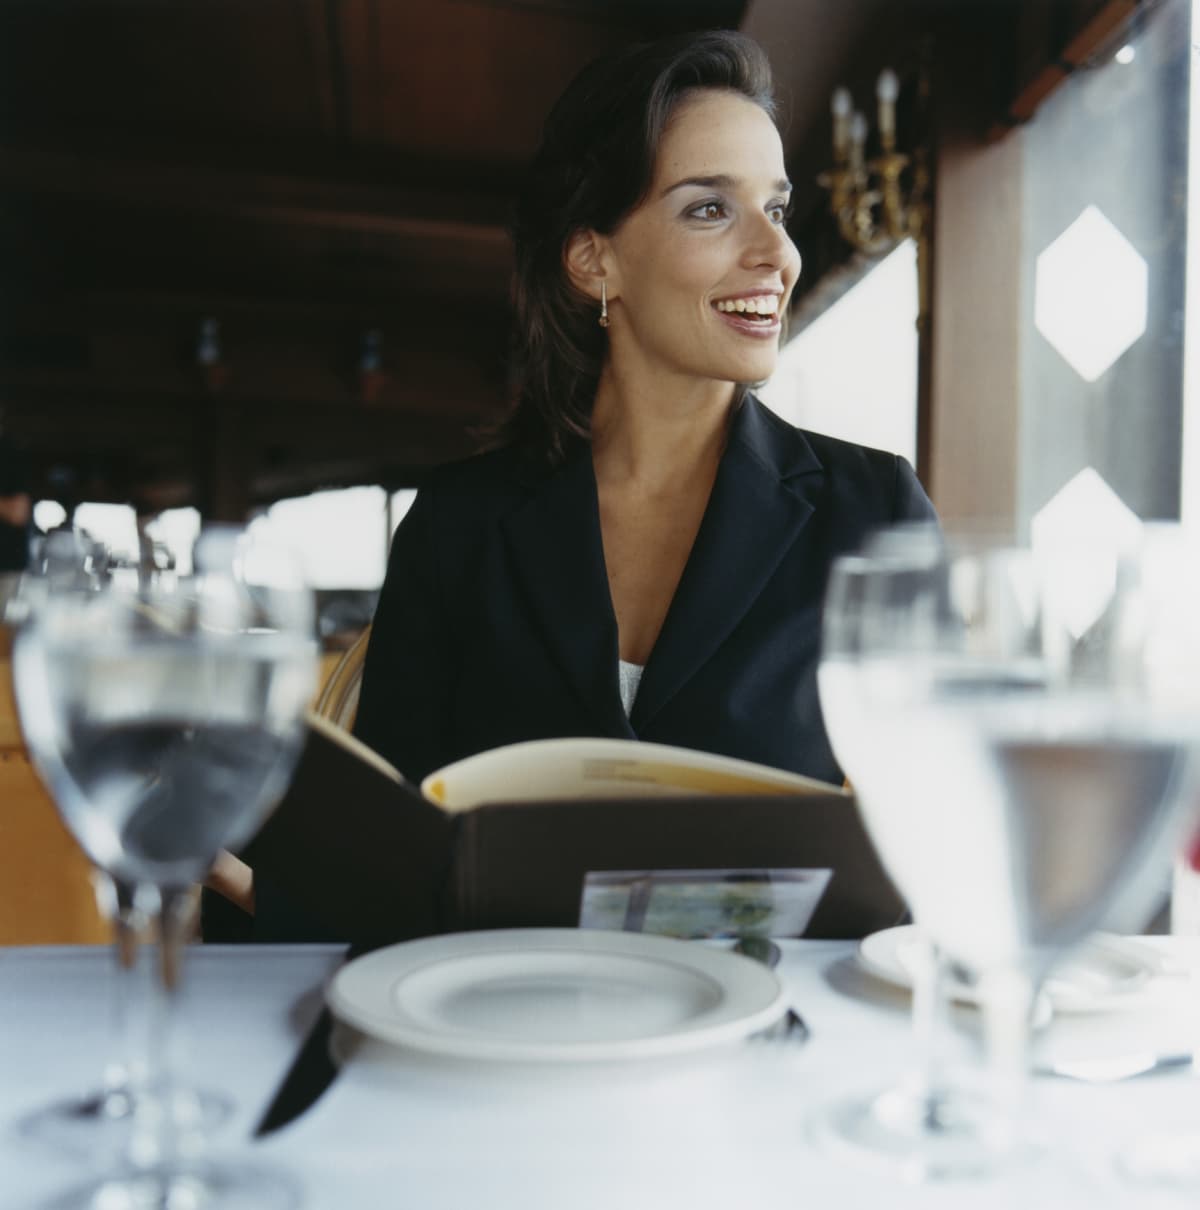 Young African American lady sitting in restaurant with cup of coffee in hand and thoughtfully looking at menu.Pretty girl in white shirt drinking coffee in cafe.Portrait of lady with dark curly hair